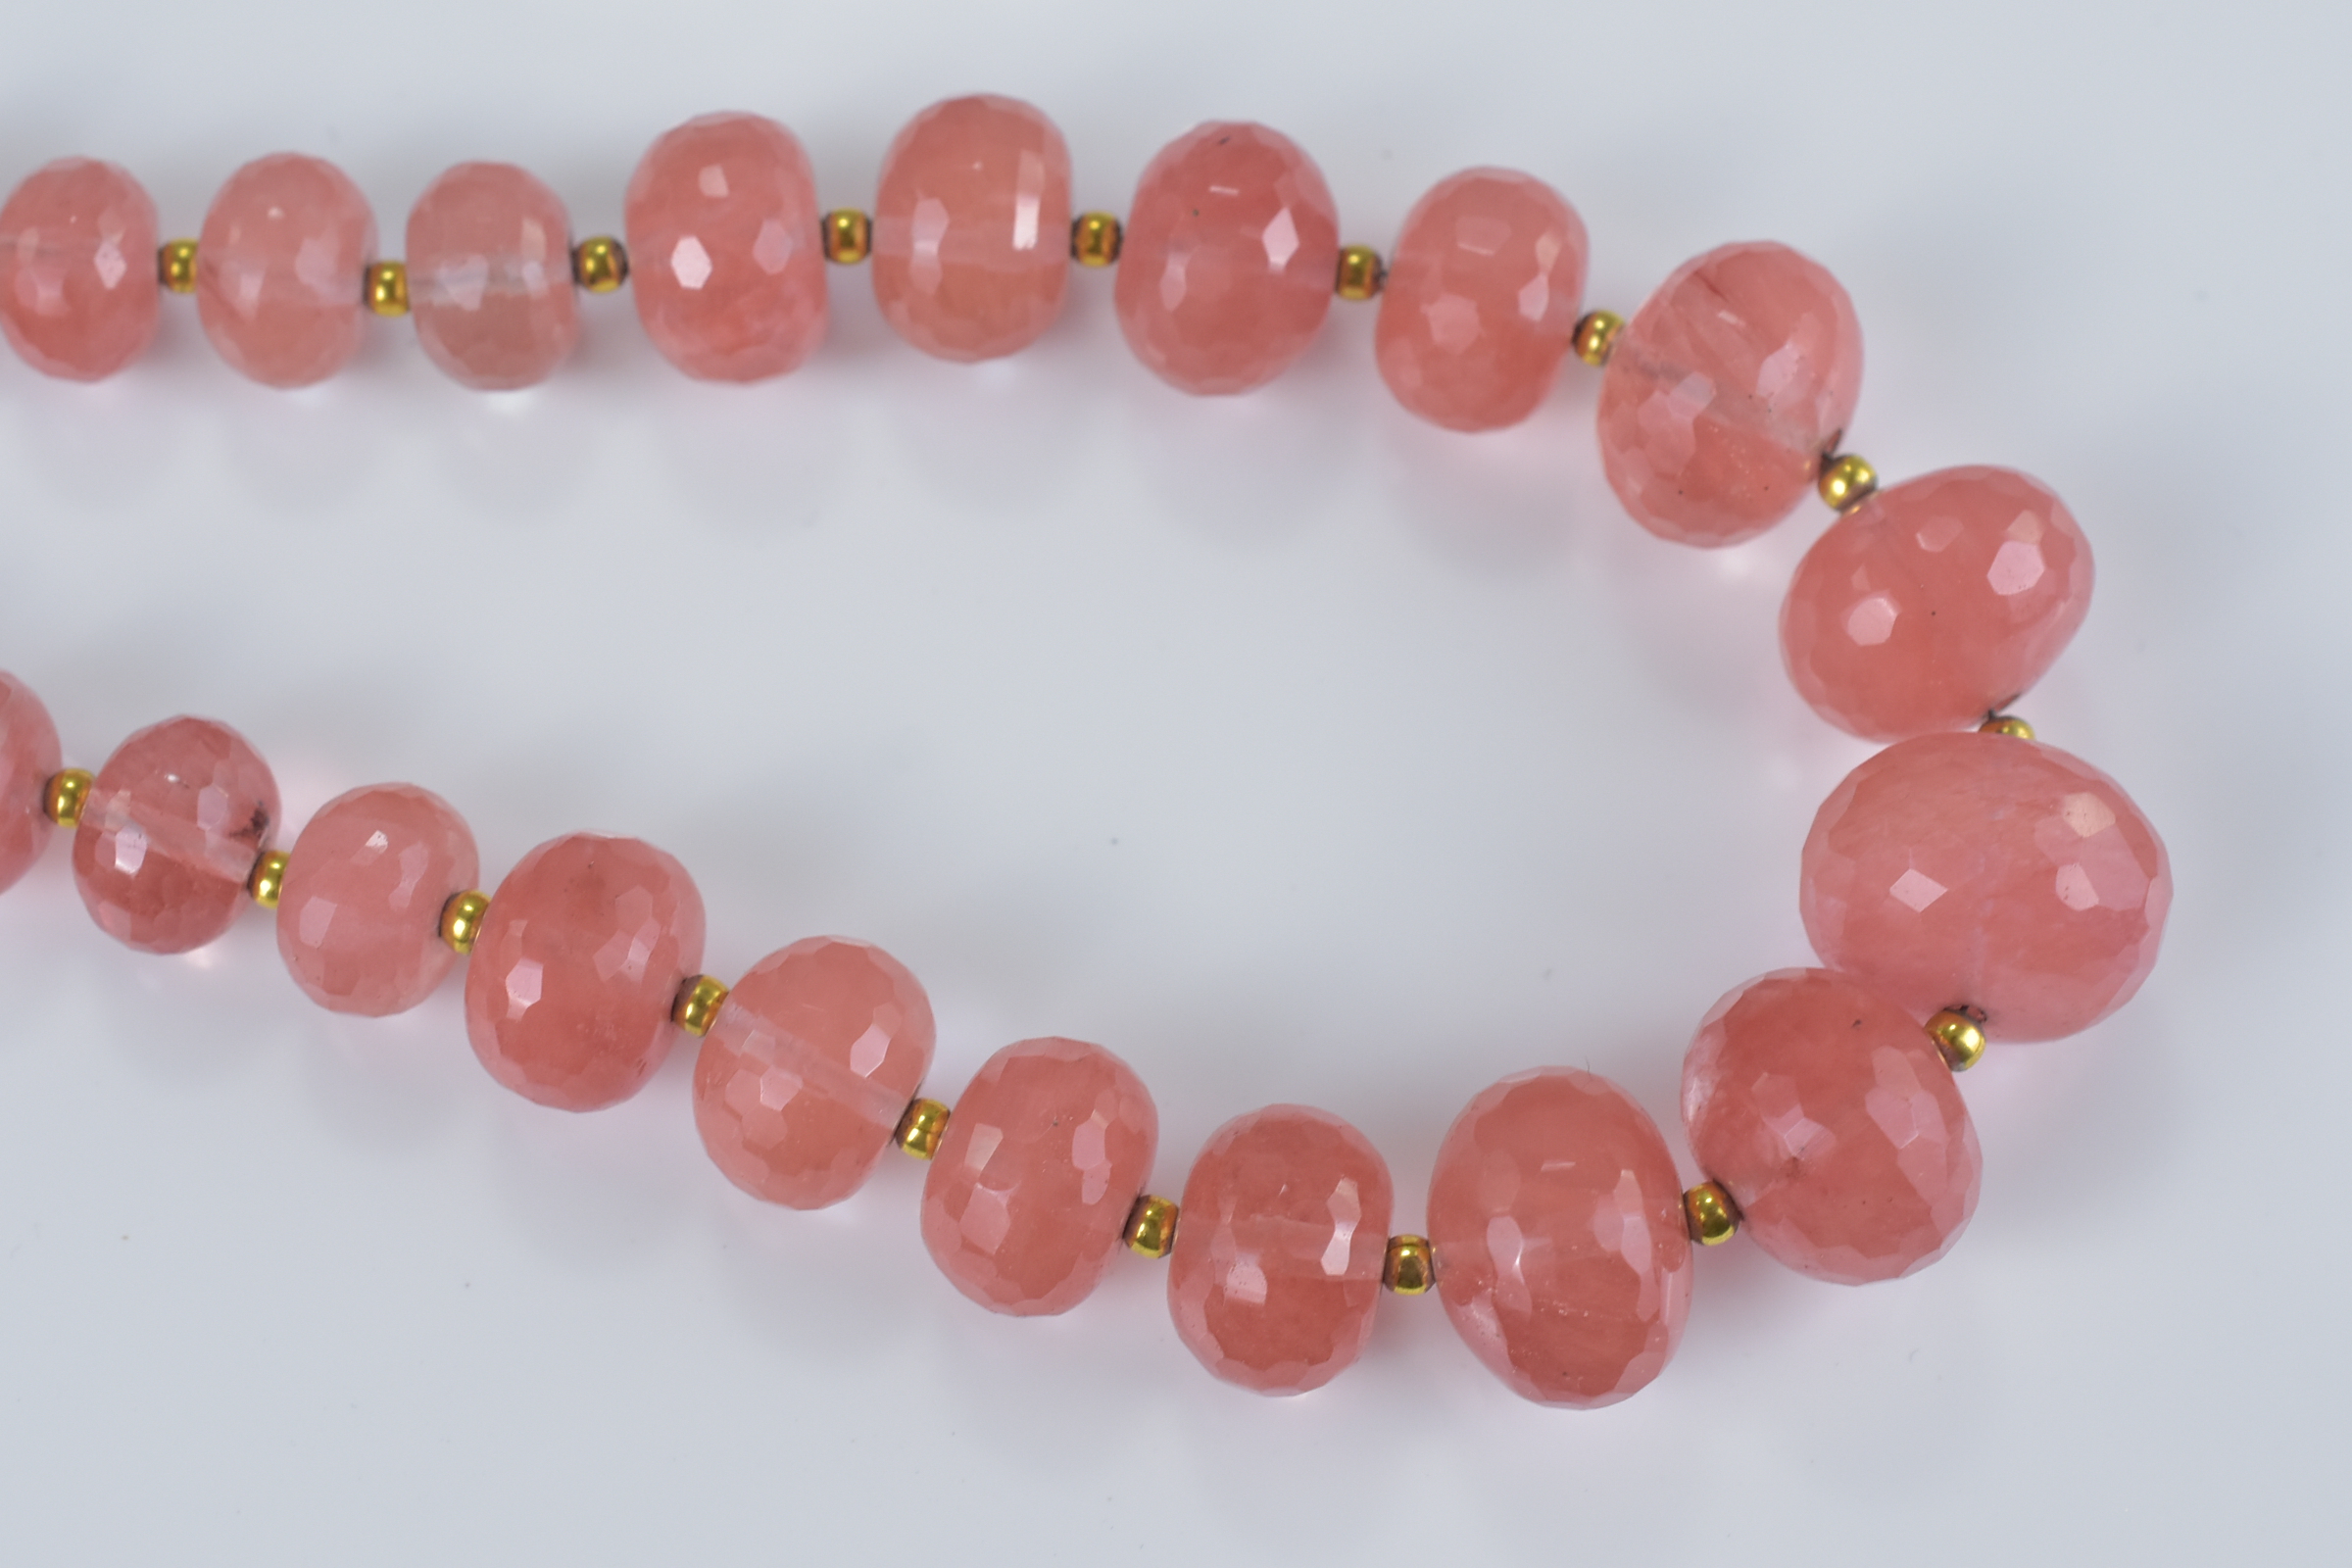 Pink Faceted Stone Necklace with Yellow Metal Spacers - Image 3 of 5